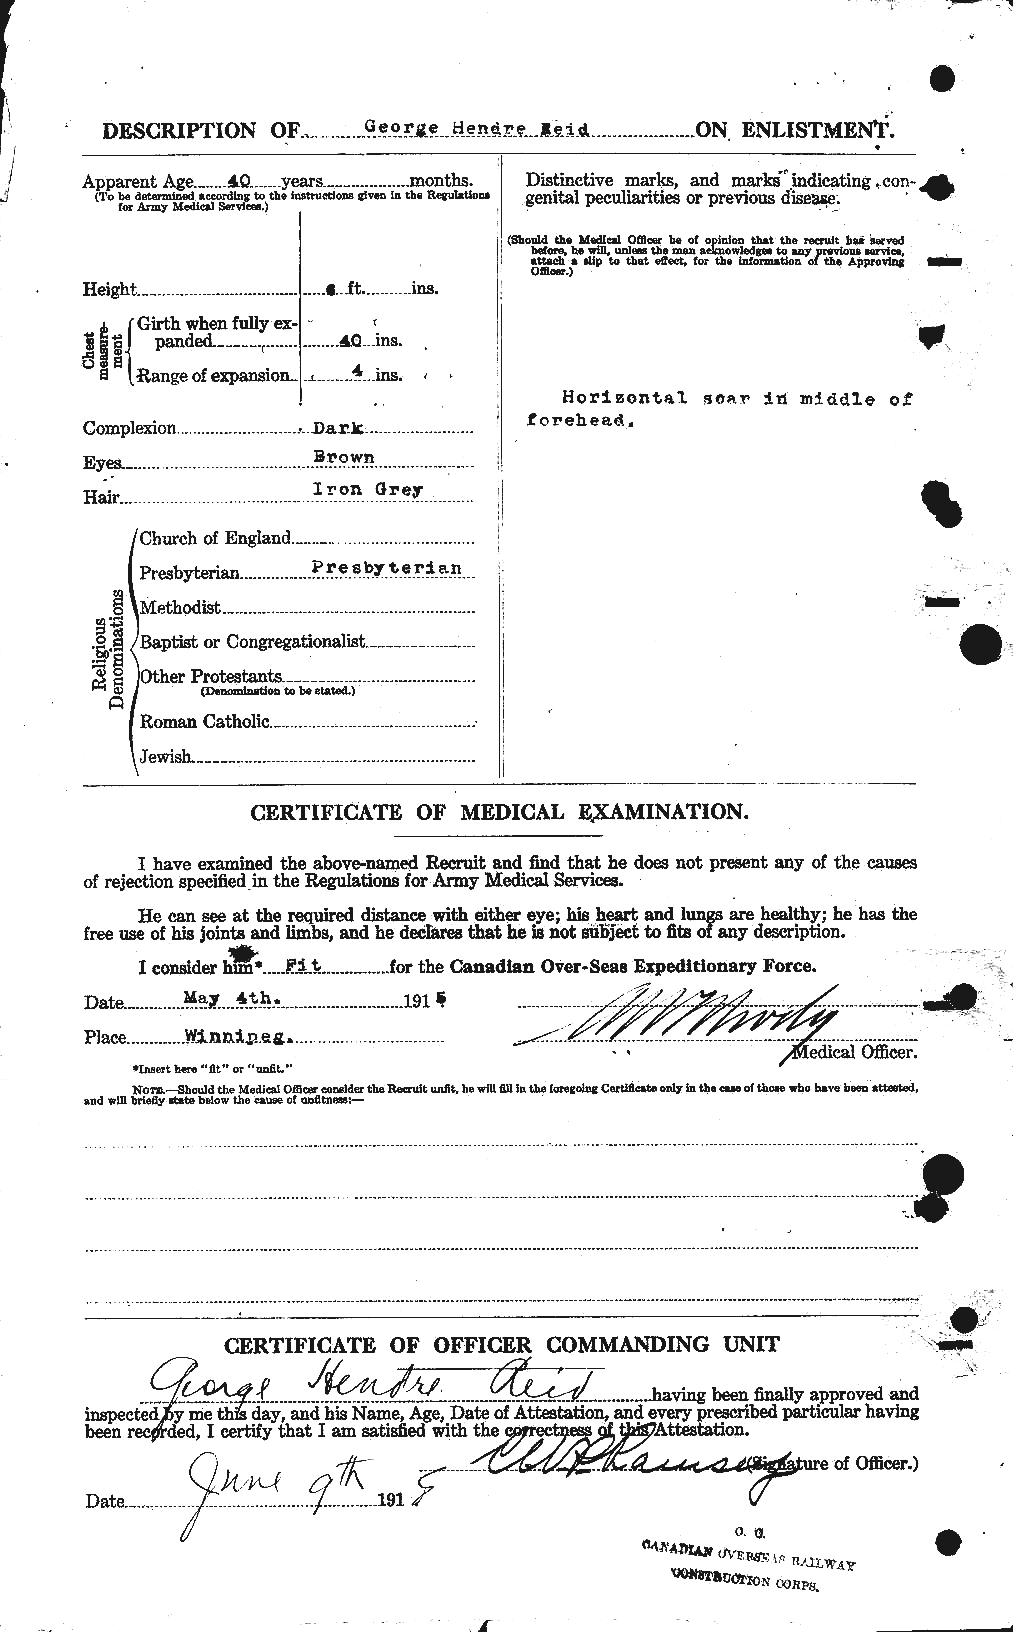 Personnel Records of the First World War - CEF 596300b